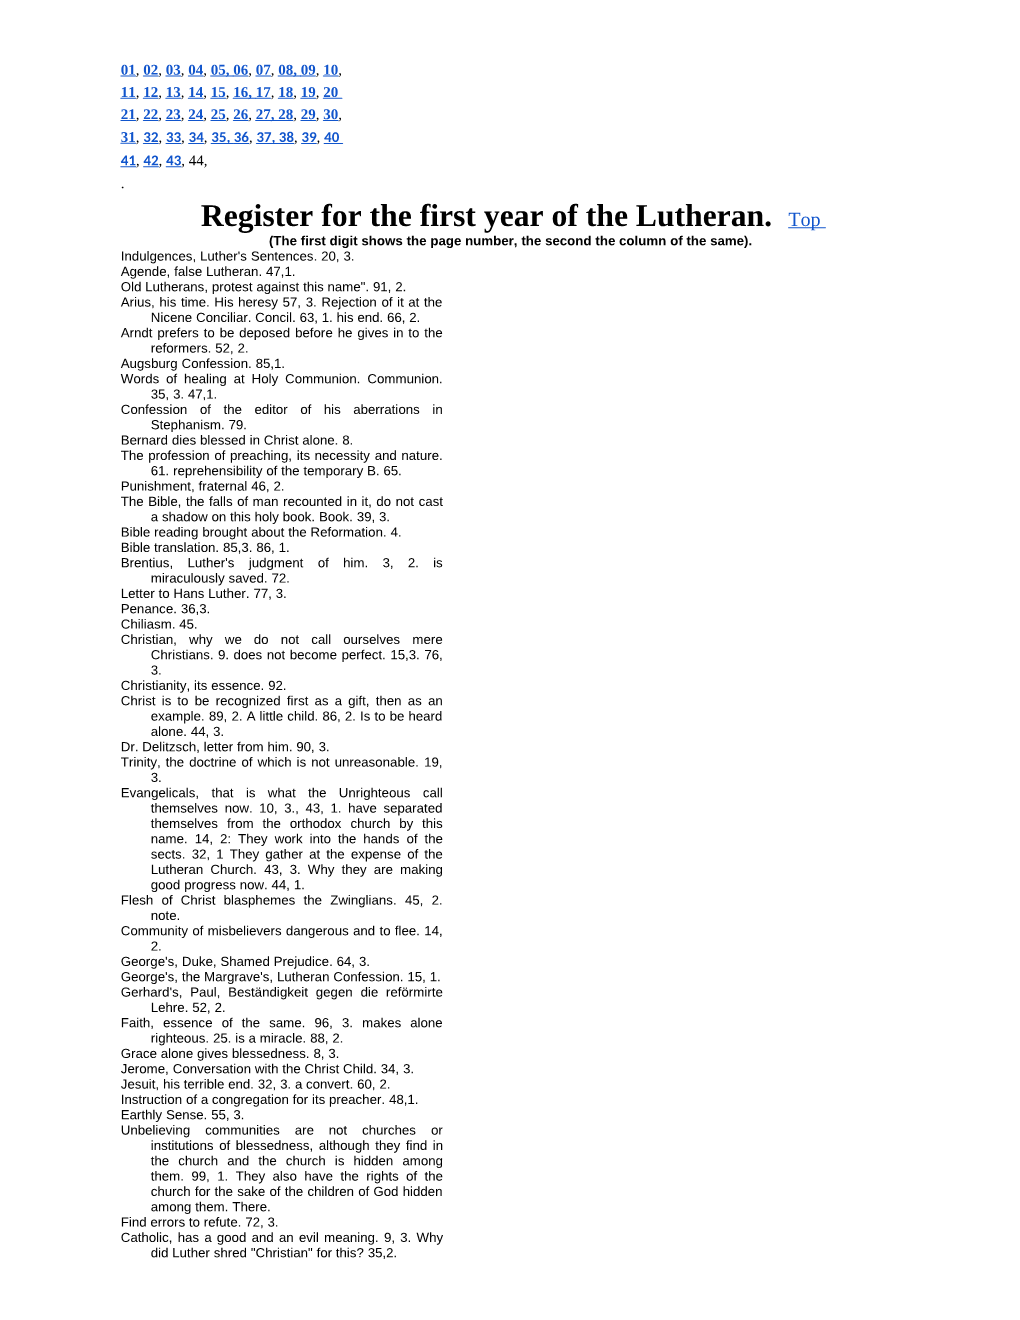 Register for the First Year of the Lutheran. Top (The First Digit Shows the Page Number, the Second the Column of the Same)